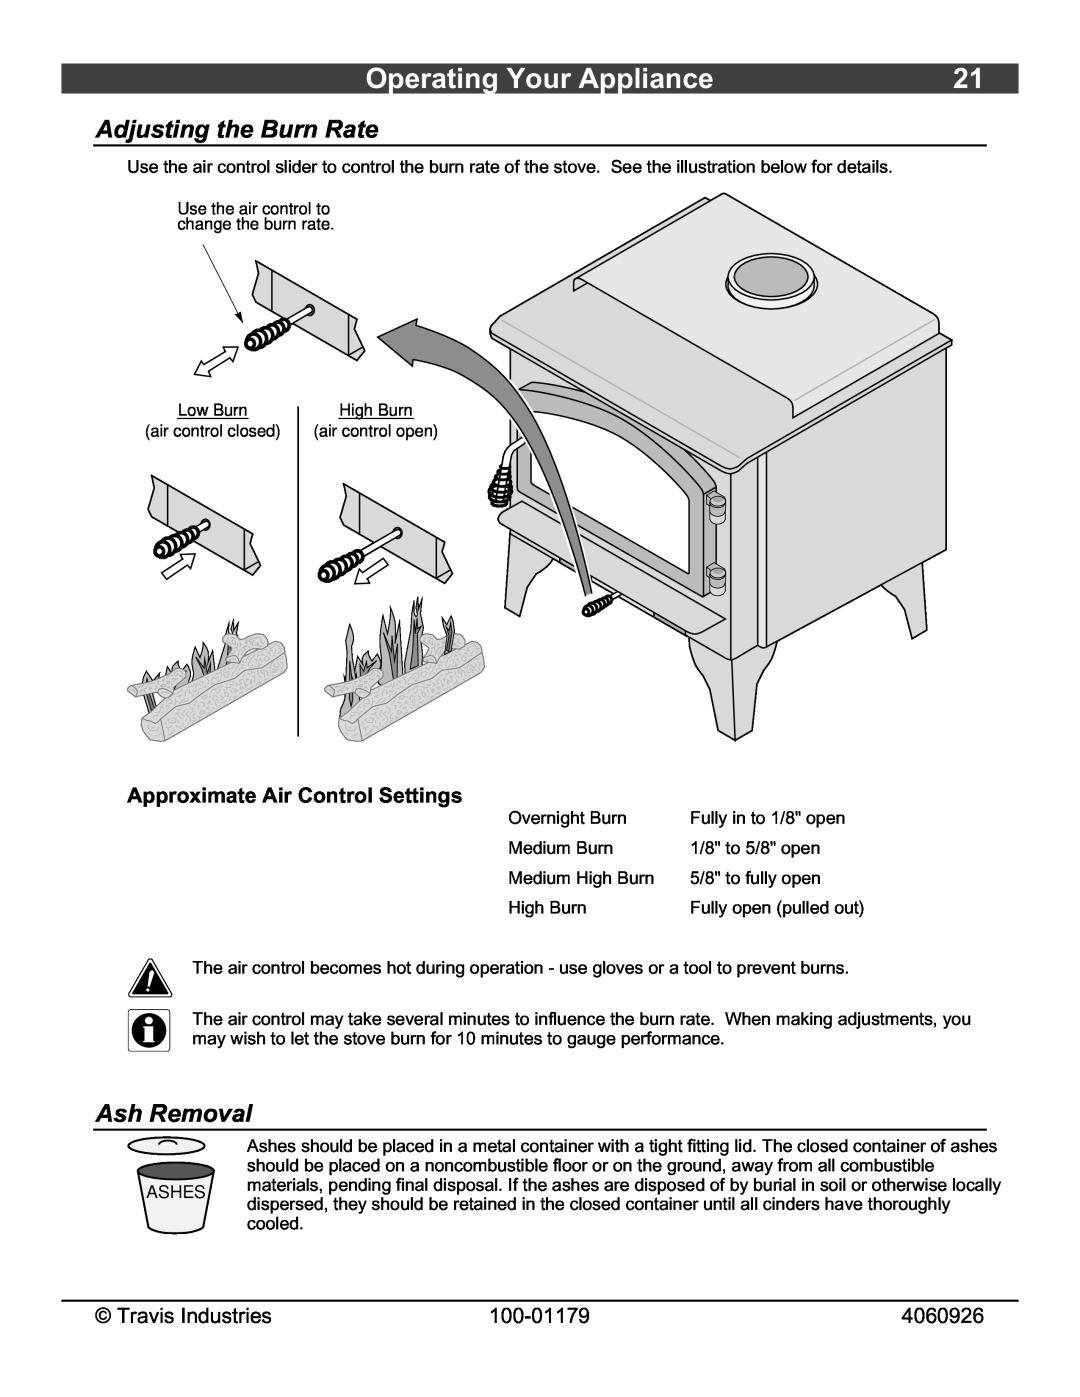 Lopi 1750 owner manual Operating Your Appliance, Adjusting the Burn Rate, Ash Removal, Approximate Air Control Settings 